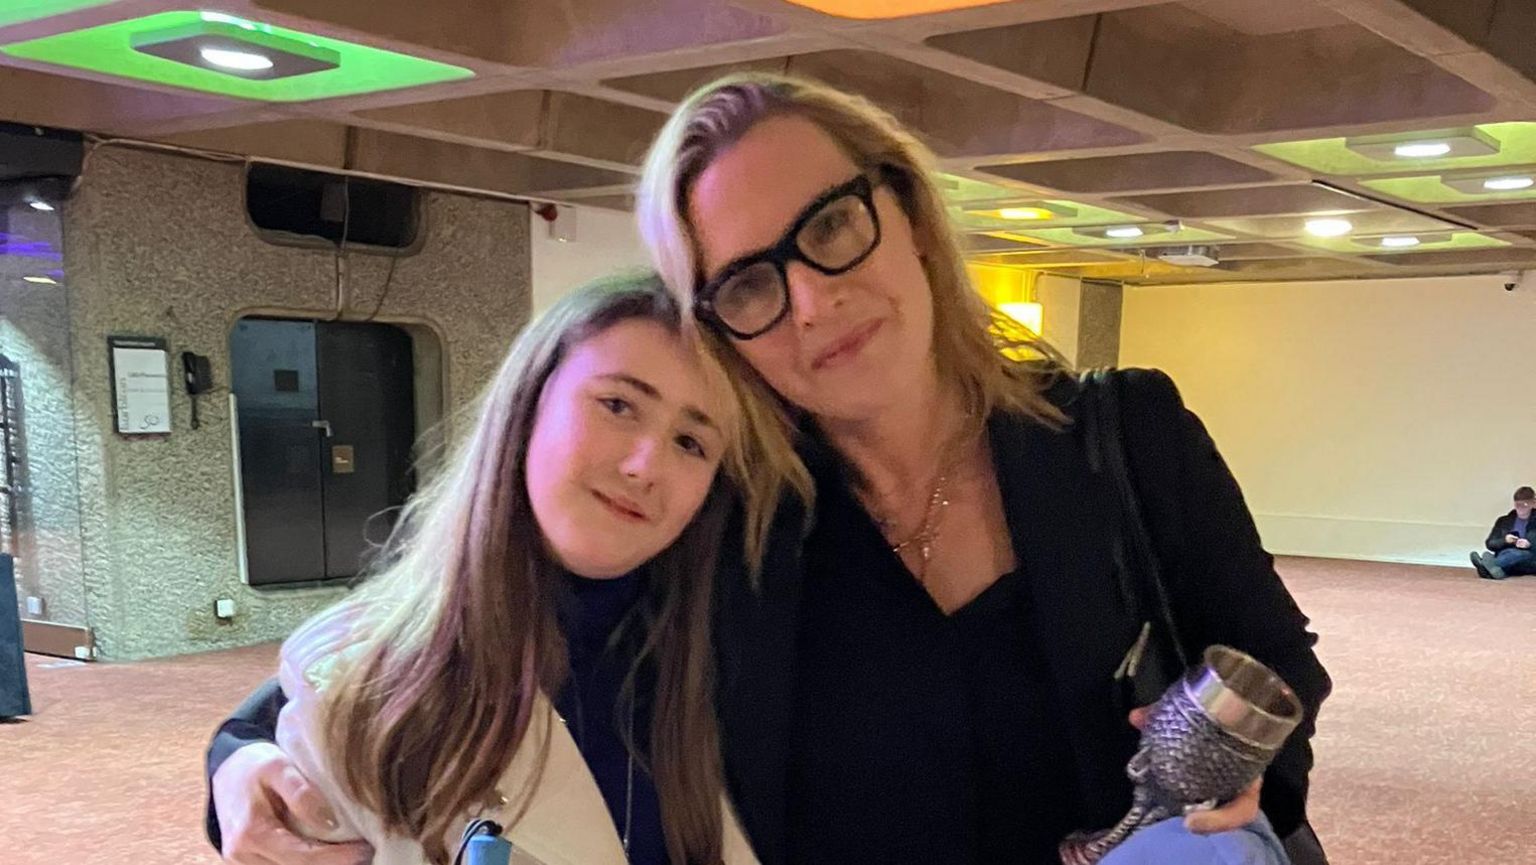 Actor Kate Winslet hugs visually impaired girl who has created a wishlist of places she wants to see before her sight deteriorates further